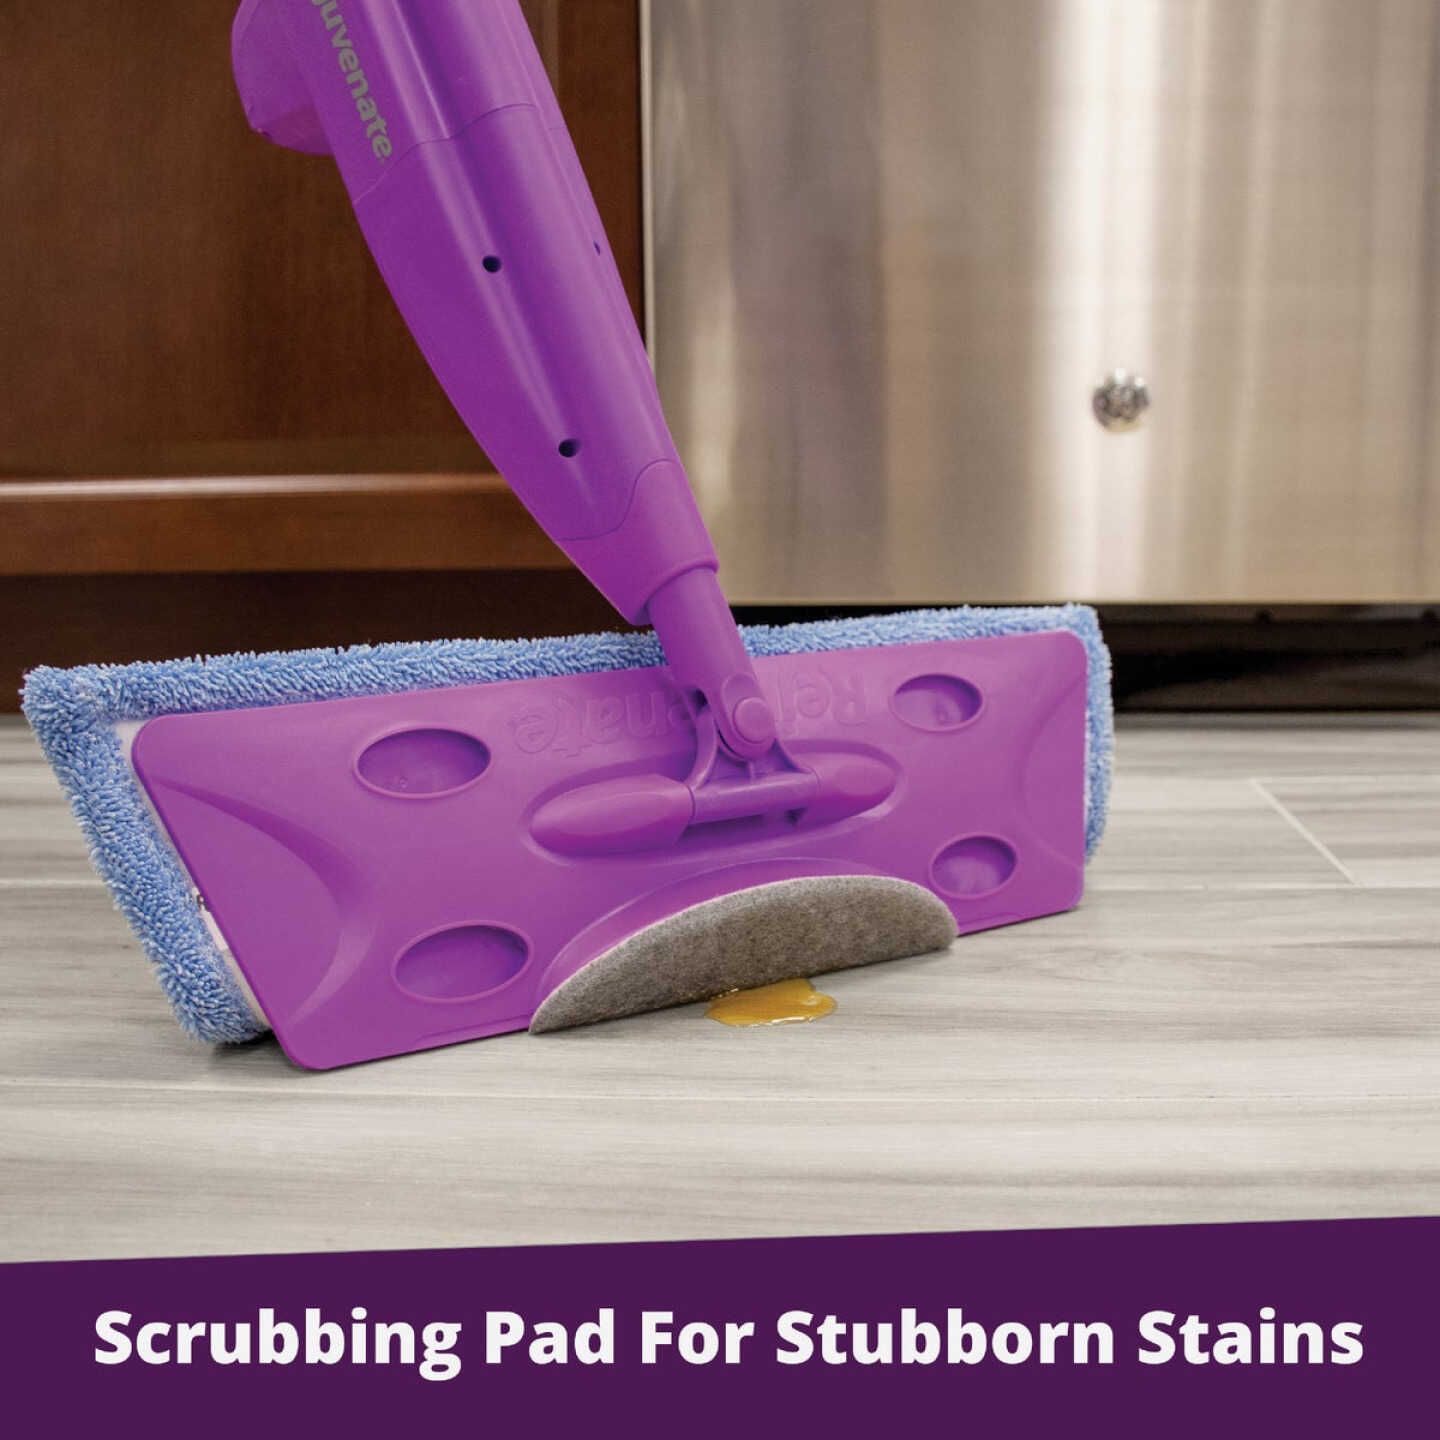 Rug Doctor Multi-Surface Spray Mop Powerful Everyday Cleaning for Hardwood, Stone, Tile, Laminate, Vinyl Floors, & More